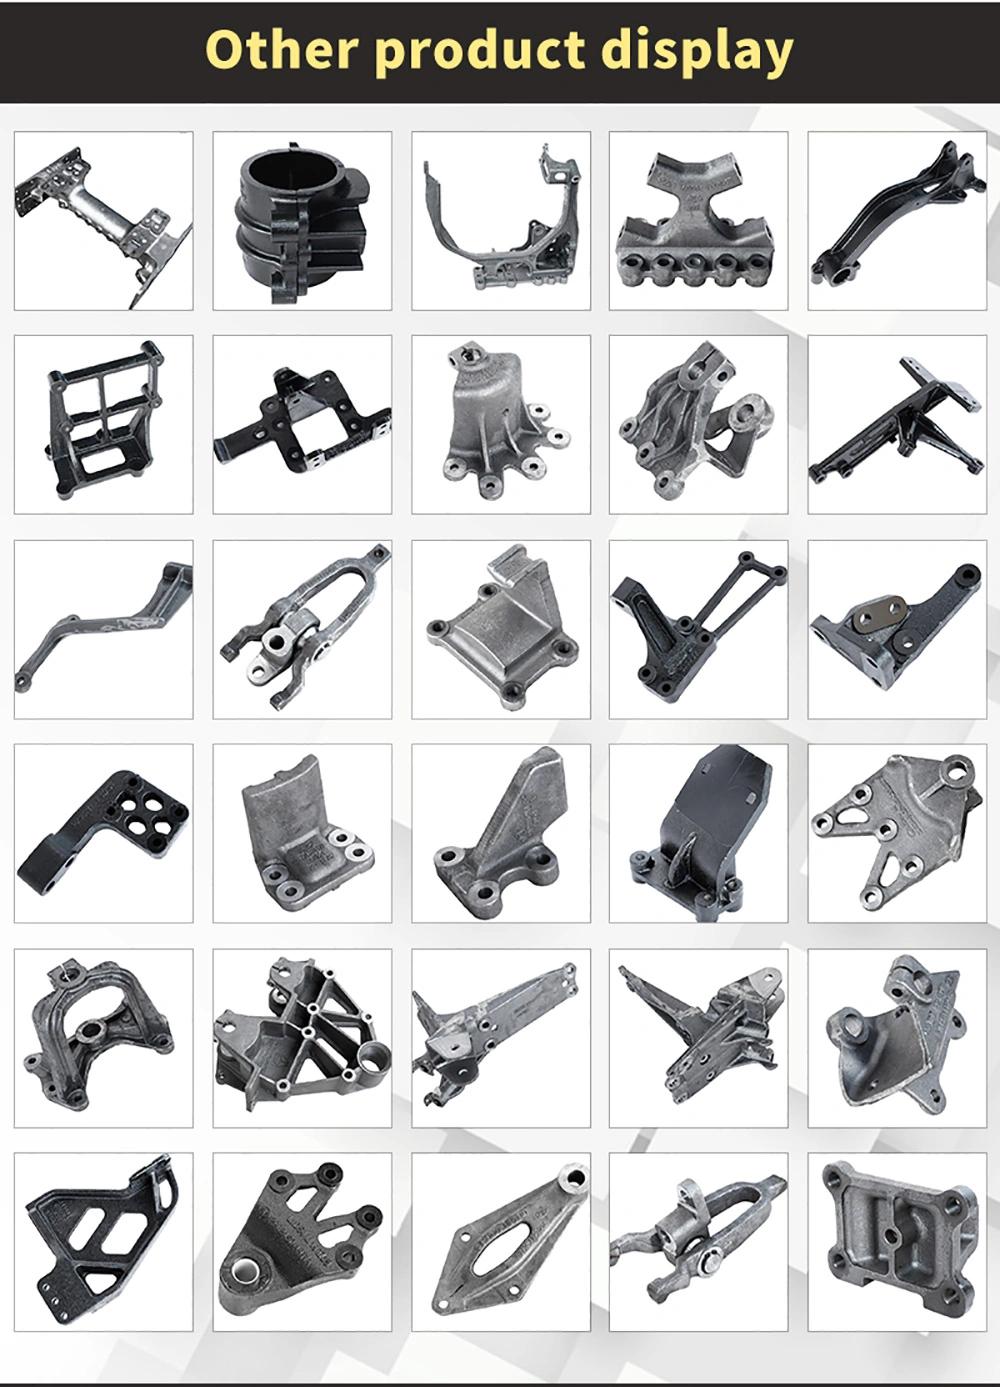 Hot-Selling Ductile Iron Castings, Iron Castings, Truck Parts, Sand Casting